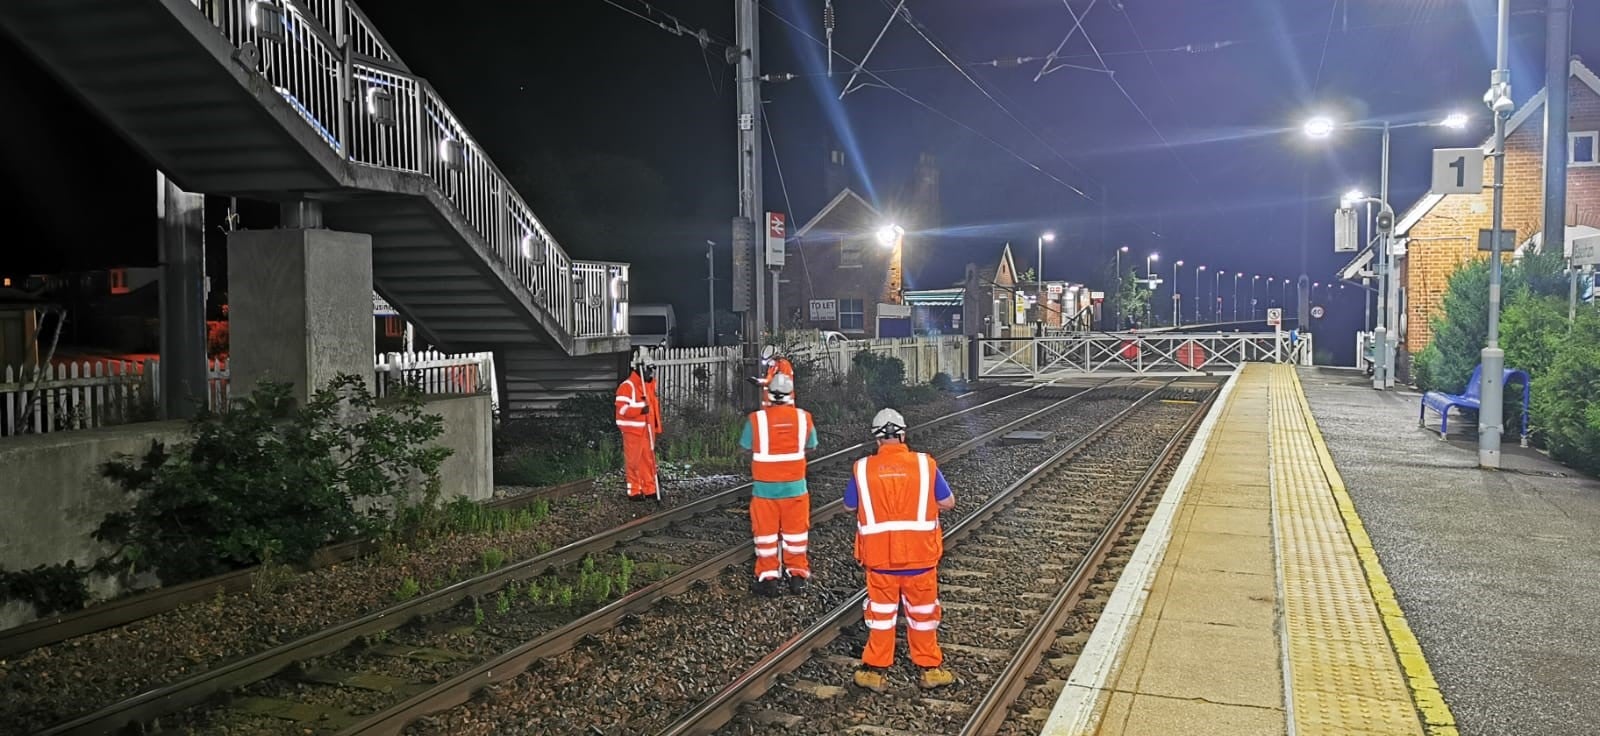 The Arcadis team uses the Eos Arrow 100 GNSS receiver to collect assets in real-time on railways in England for Network Rail